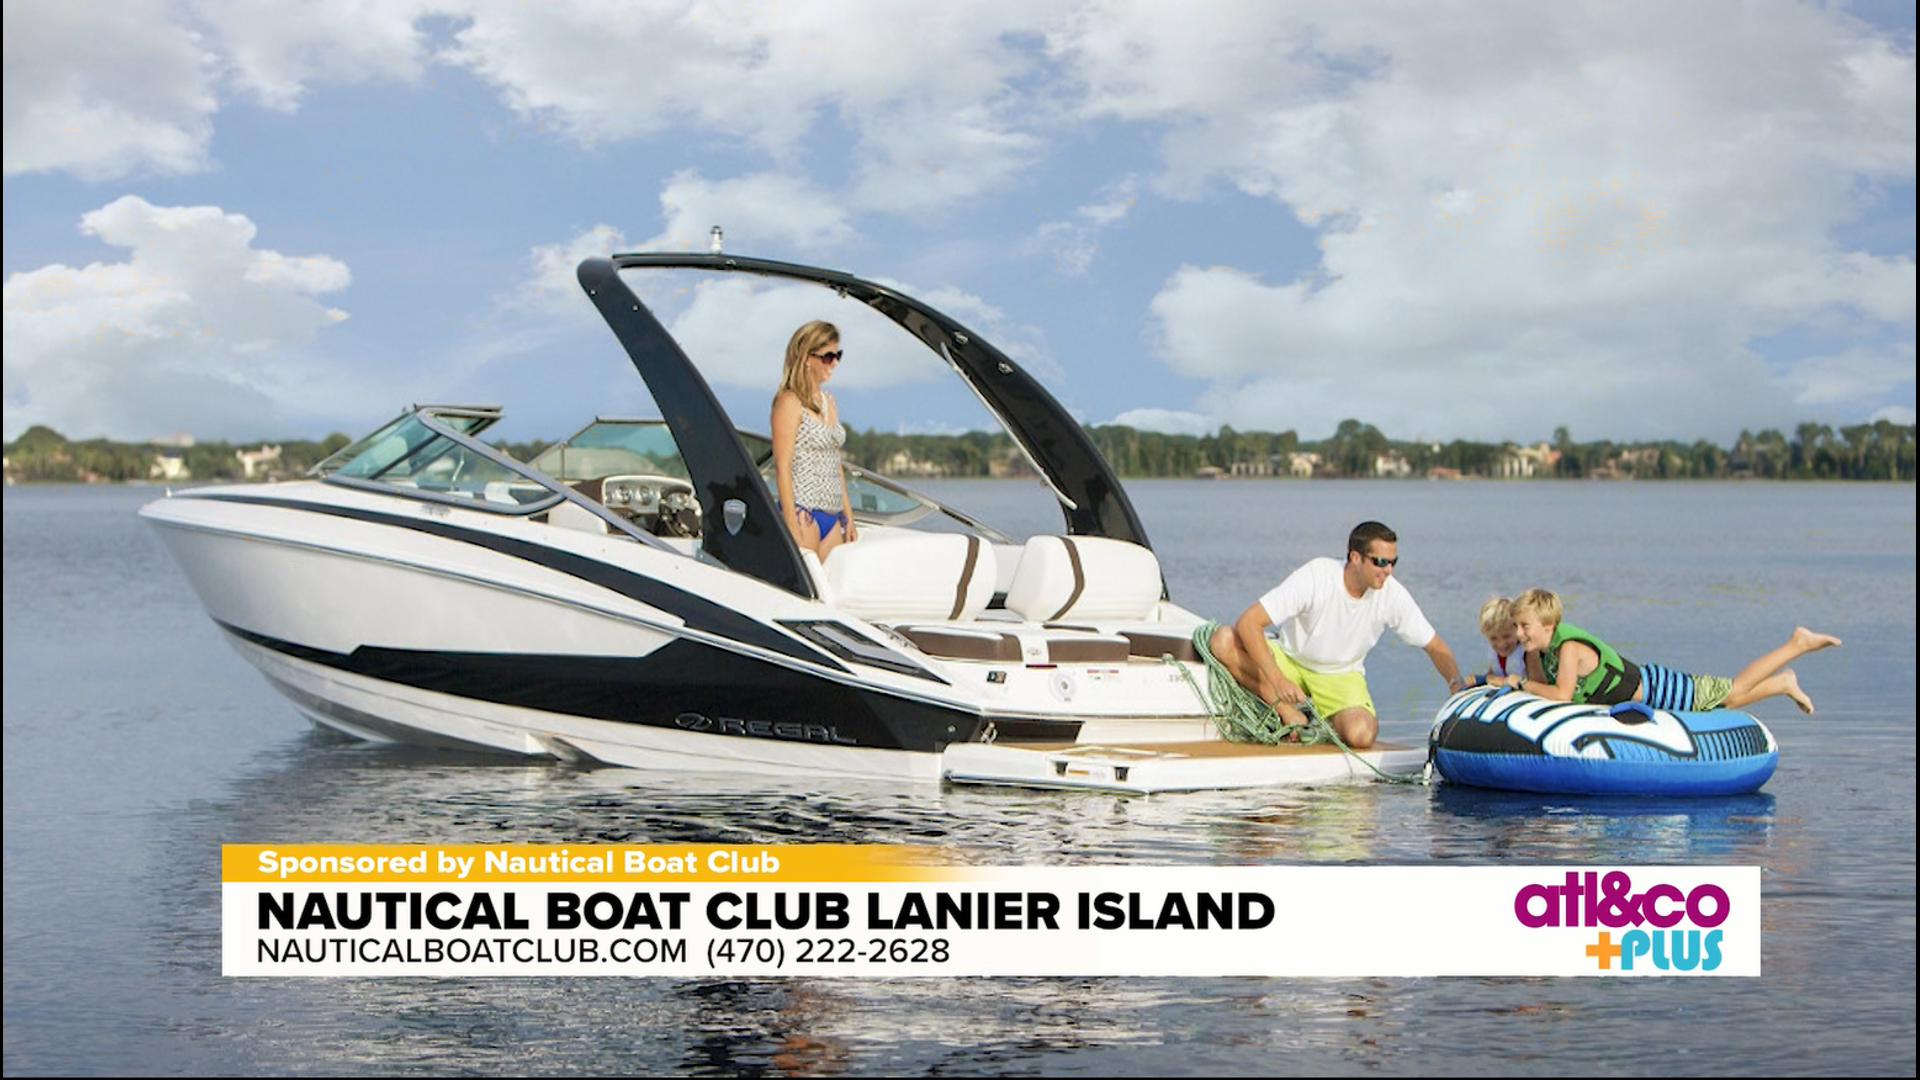 Have some fun in the sun this summer with the whole family! Join the Nautical Boat Club at Lanier Islands and enjoy unlimited access to their fine fleet.